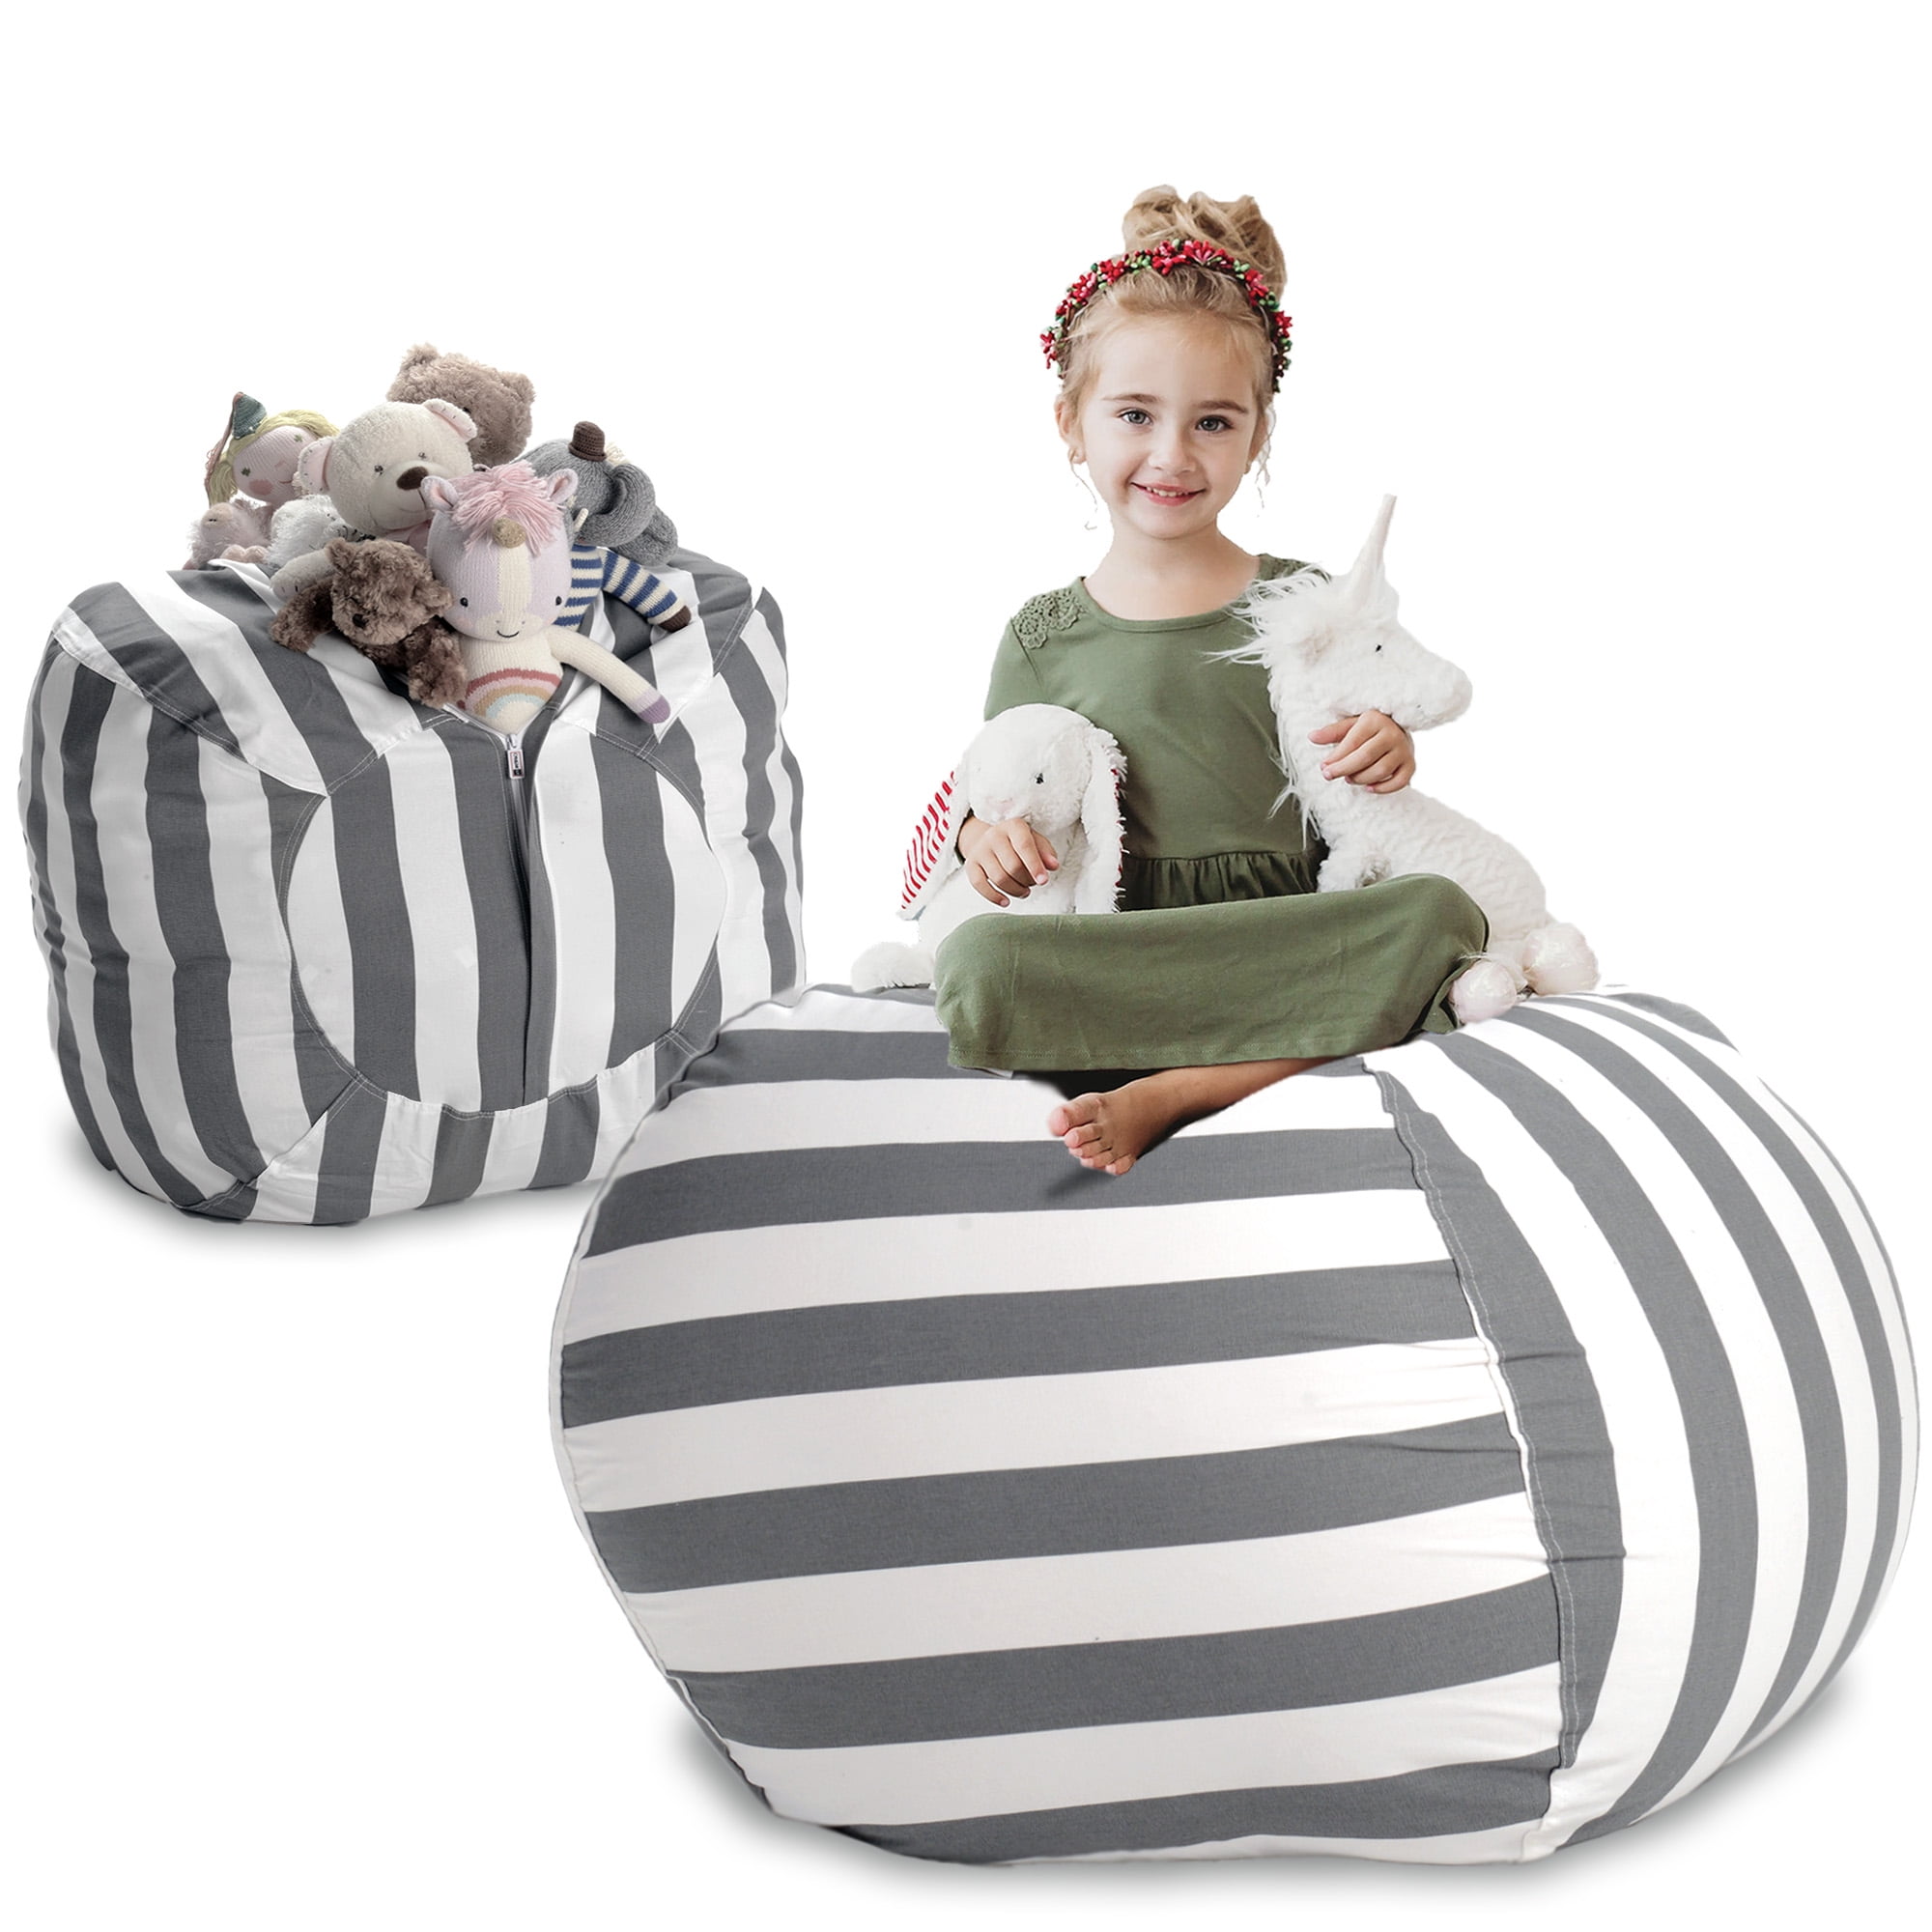 EXTRA LARGE 38'' Stuffed Animals Bean Bag Chair Cover-100% Cotton Canvas Storage 